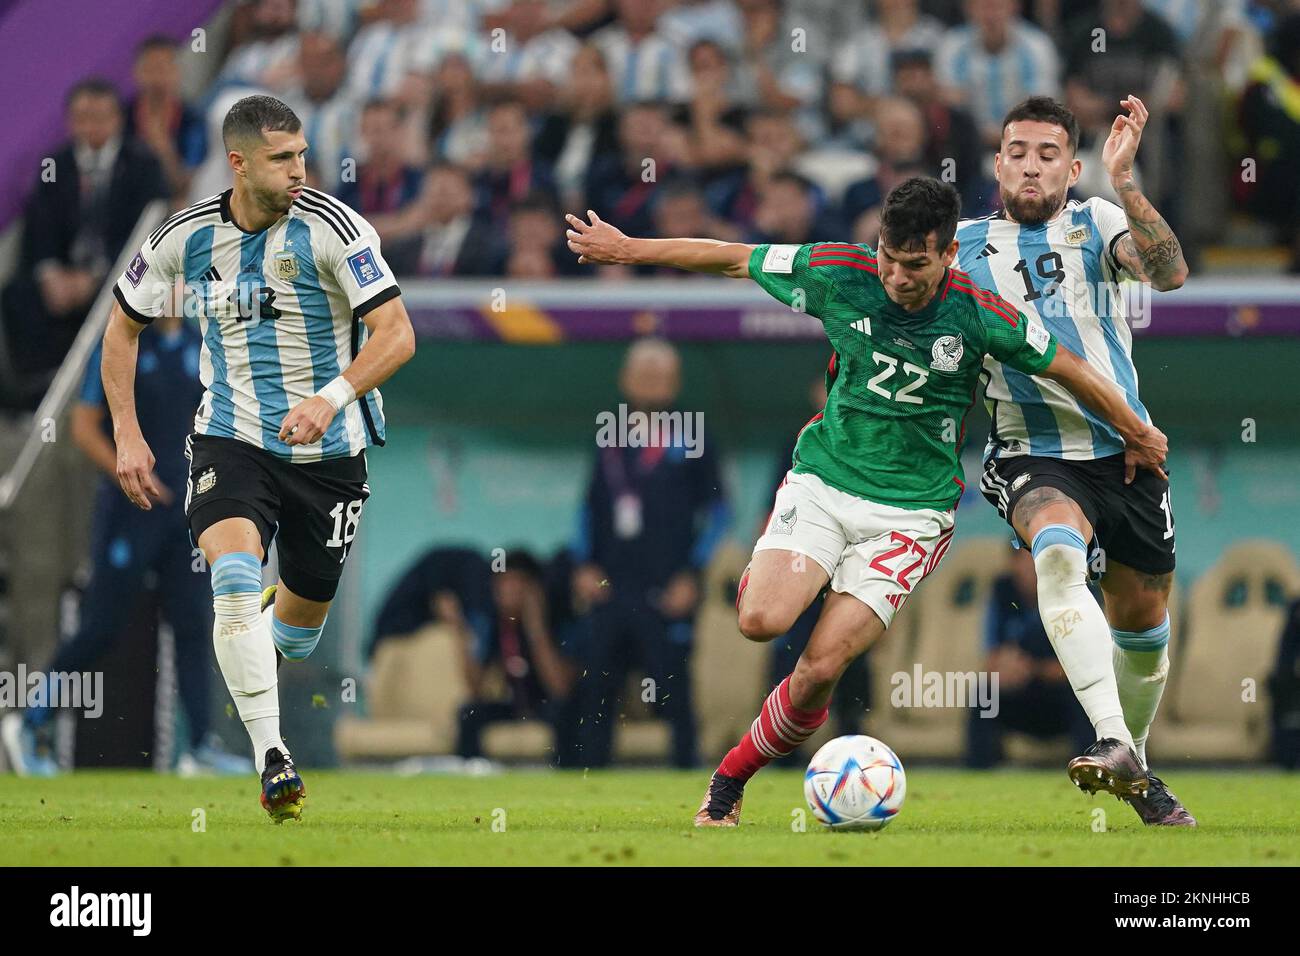 LUSAIL, QATAR - NOVEMBER 26: Player of Argentina Nicolás Otamendi and Thiago Almada fights for the ball with player of Mexico Hirving Lozano during the FIFA World Cup Qatar 2022 group C match between Argentina and Mexico at Lusail Stadium on November 26, 2022 in Lusail, Qatar. (Photo by Florencia Tan Jun/PxImages) Stock Photo